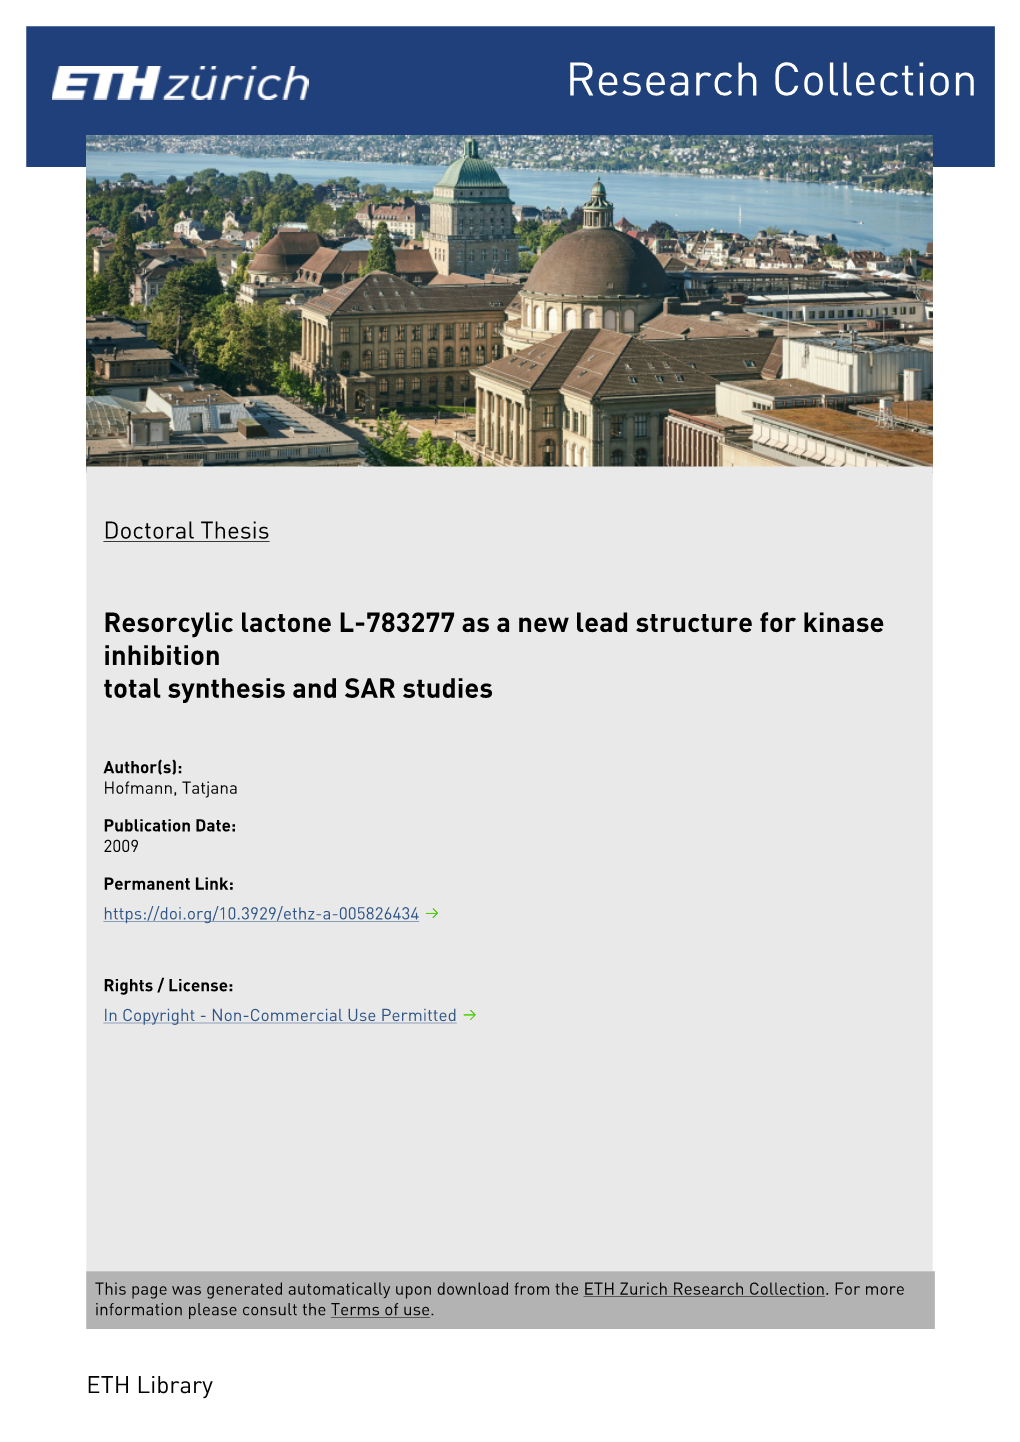 Total Synthesis and SAR Studies